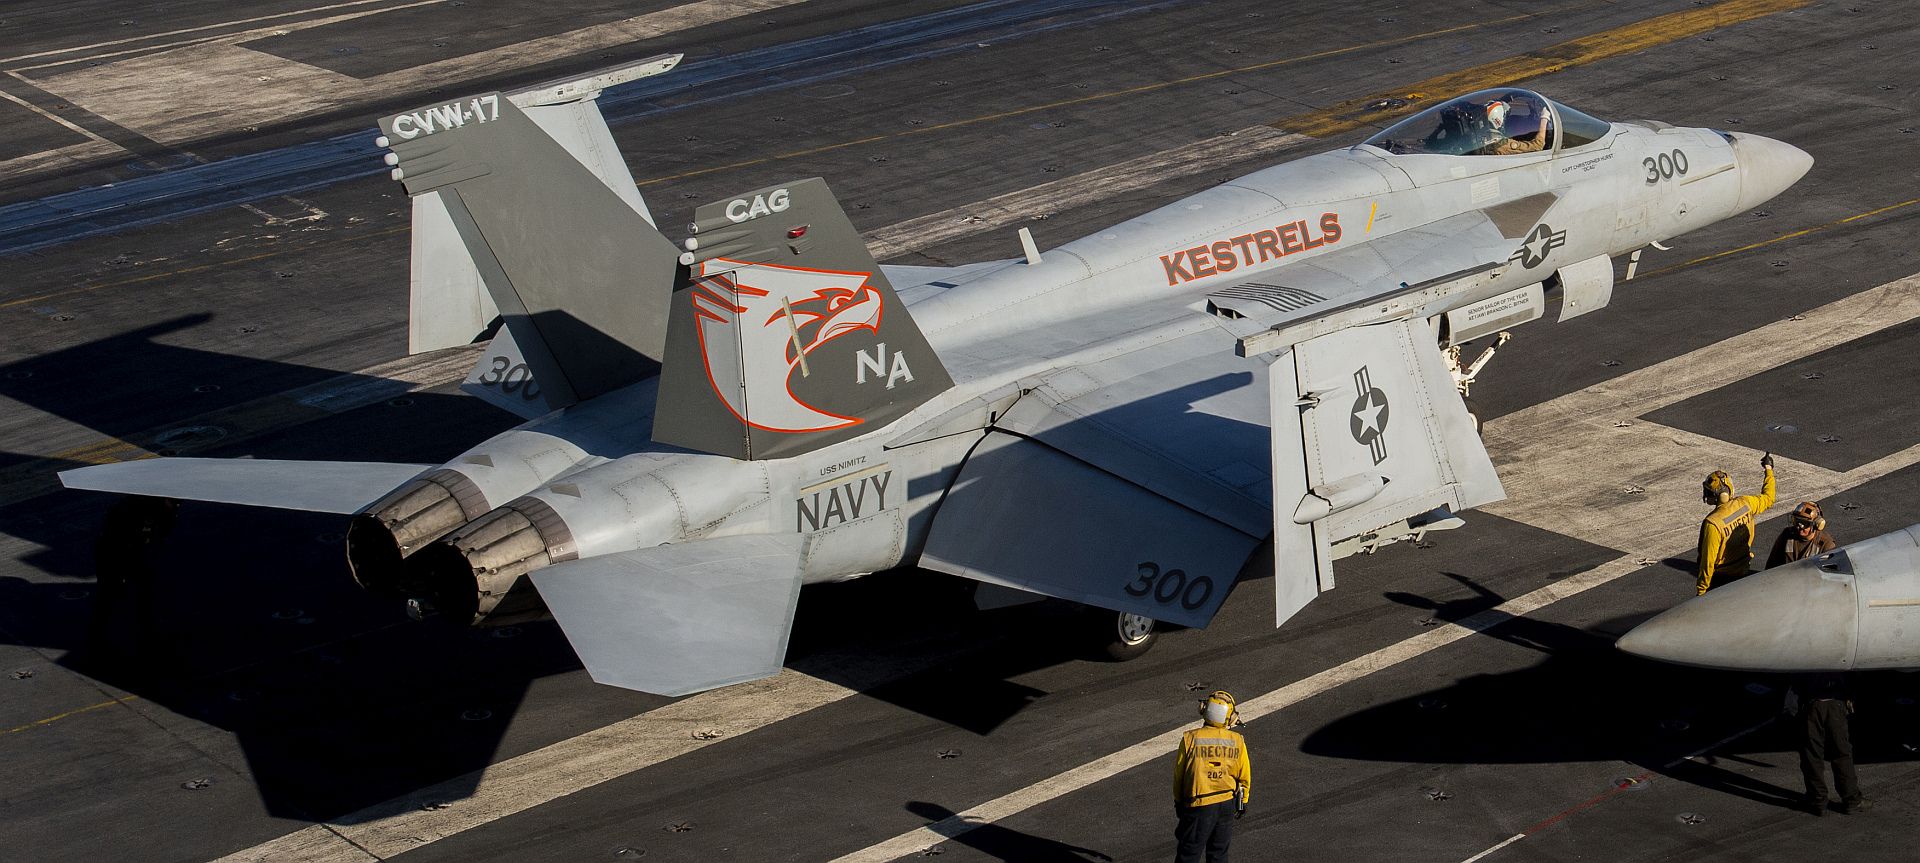 FA 18E Super Hornet From The Kestrels Of Strike Fighter Squadron VFA 137 Taxis Across The Flight Deck Of The Aircraft Carrier USS Nimitz